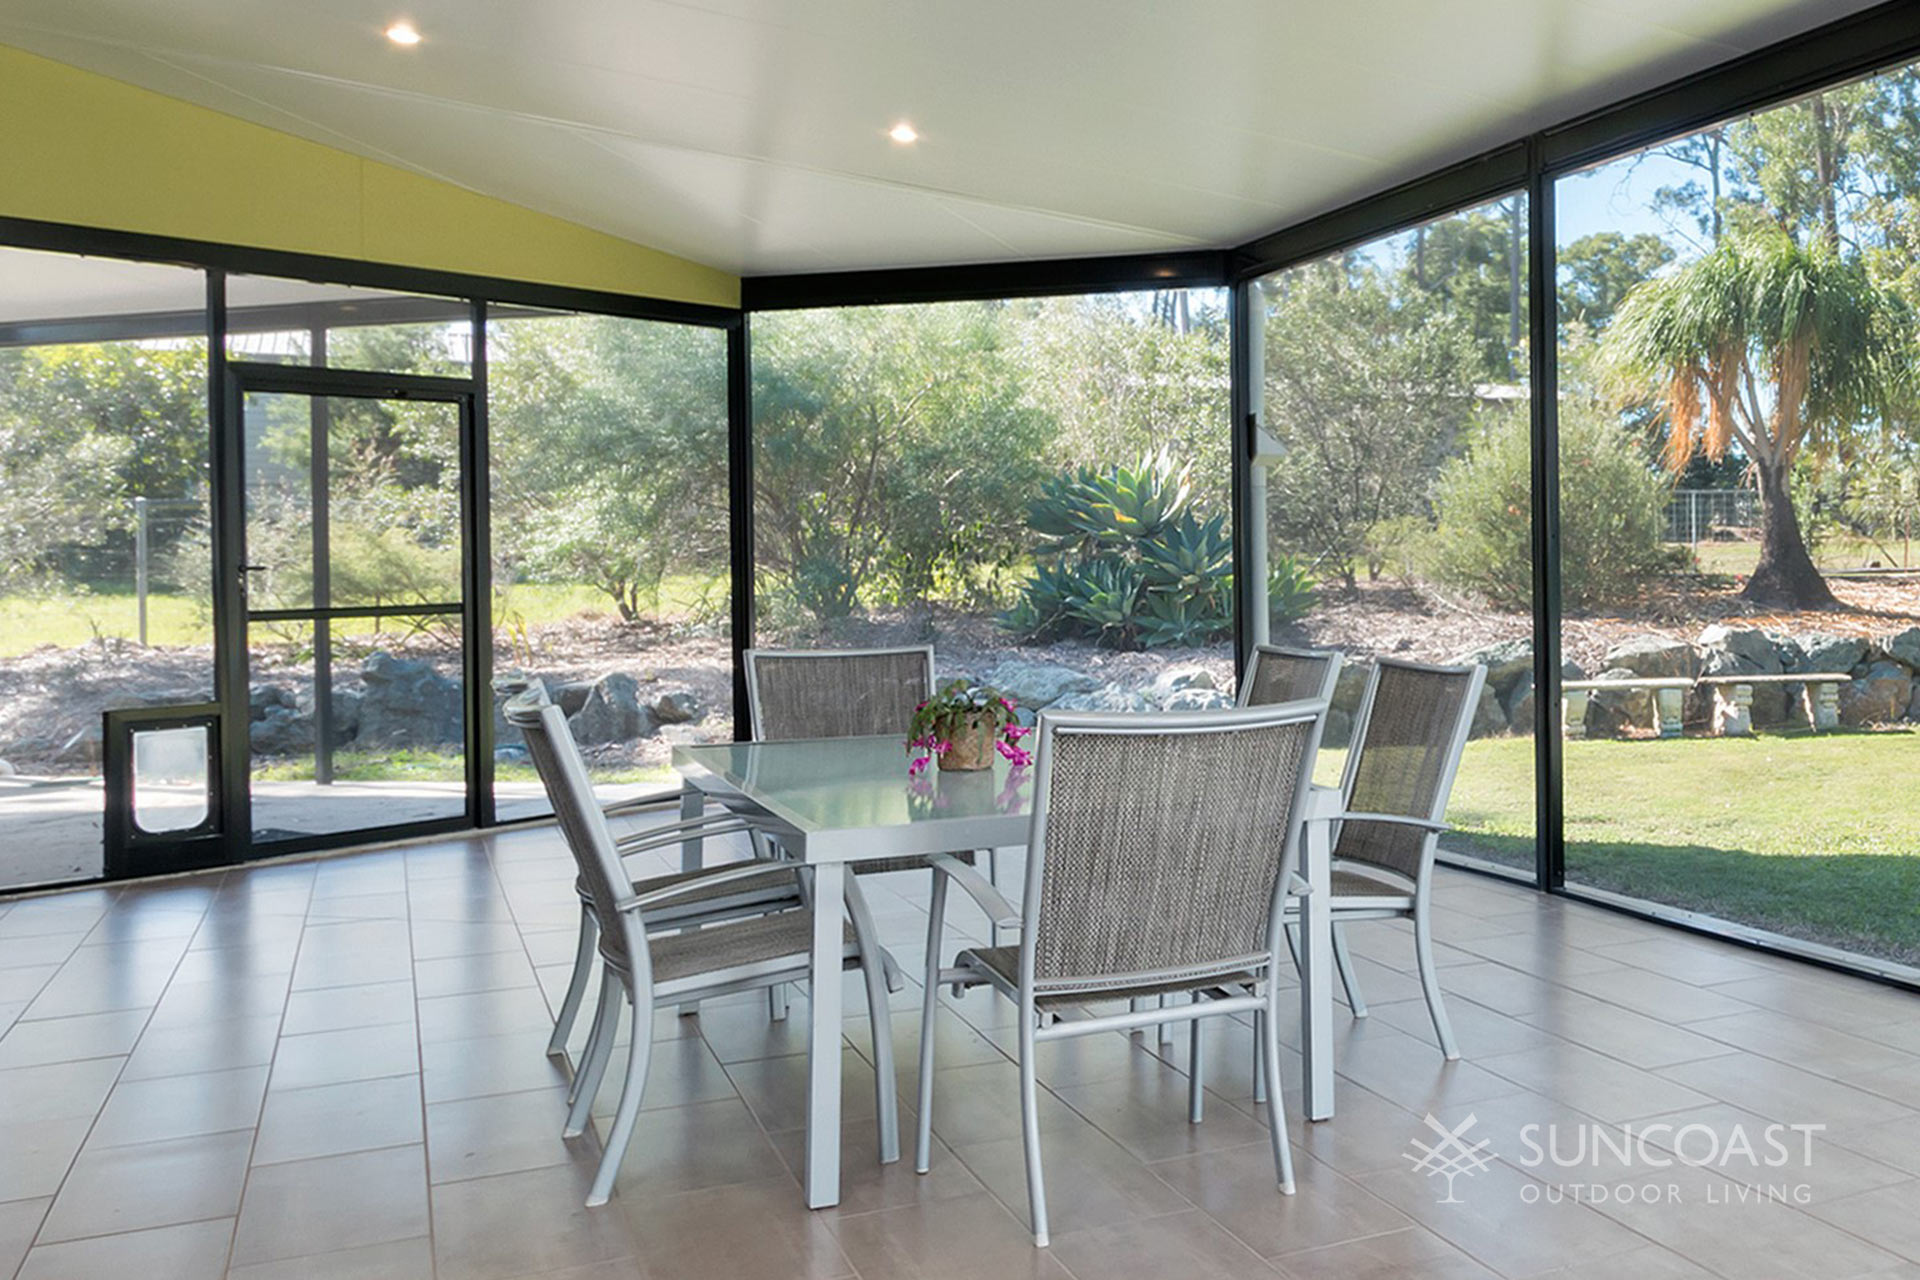 Screened enclosure with pet door and outdoor dining area